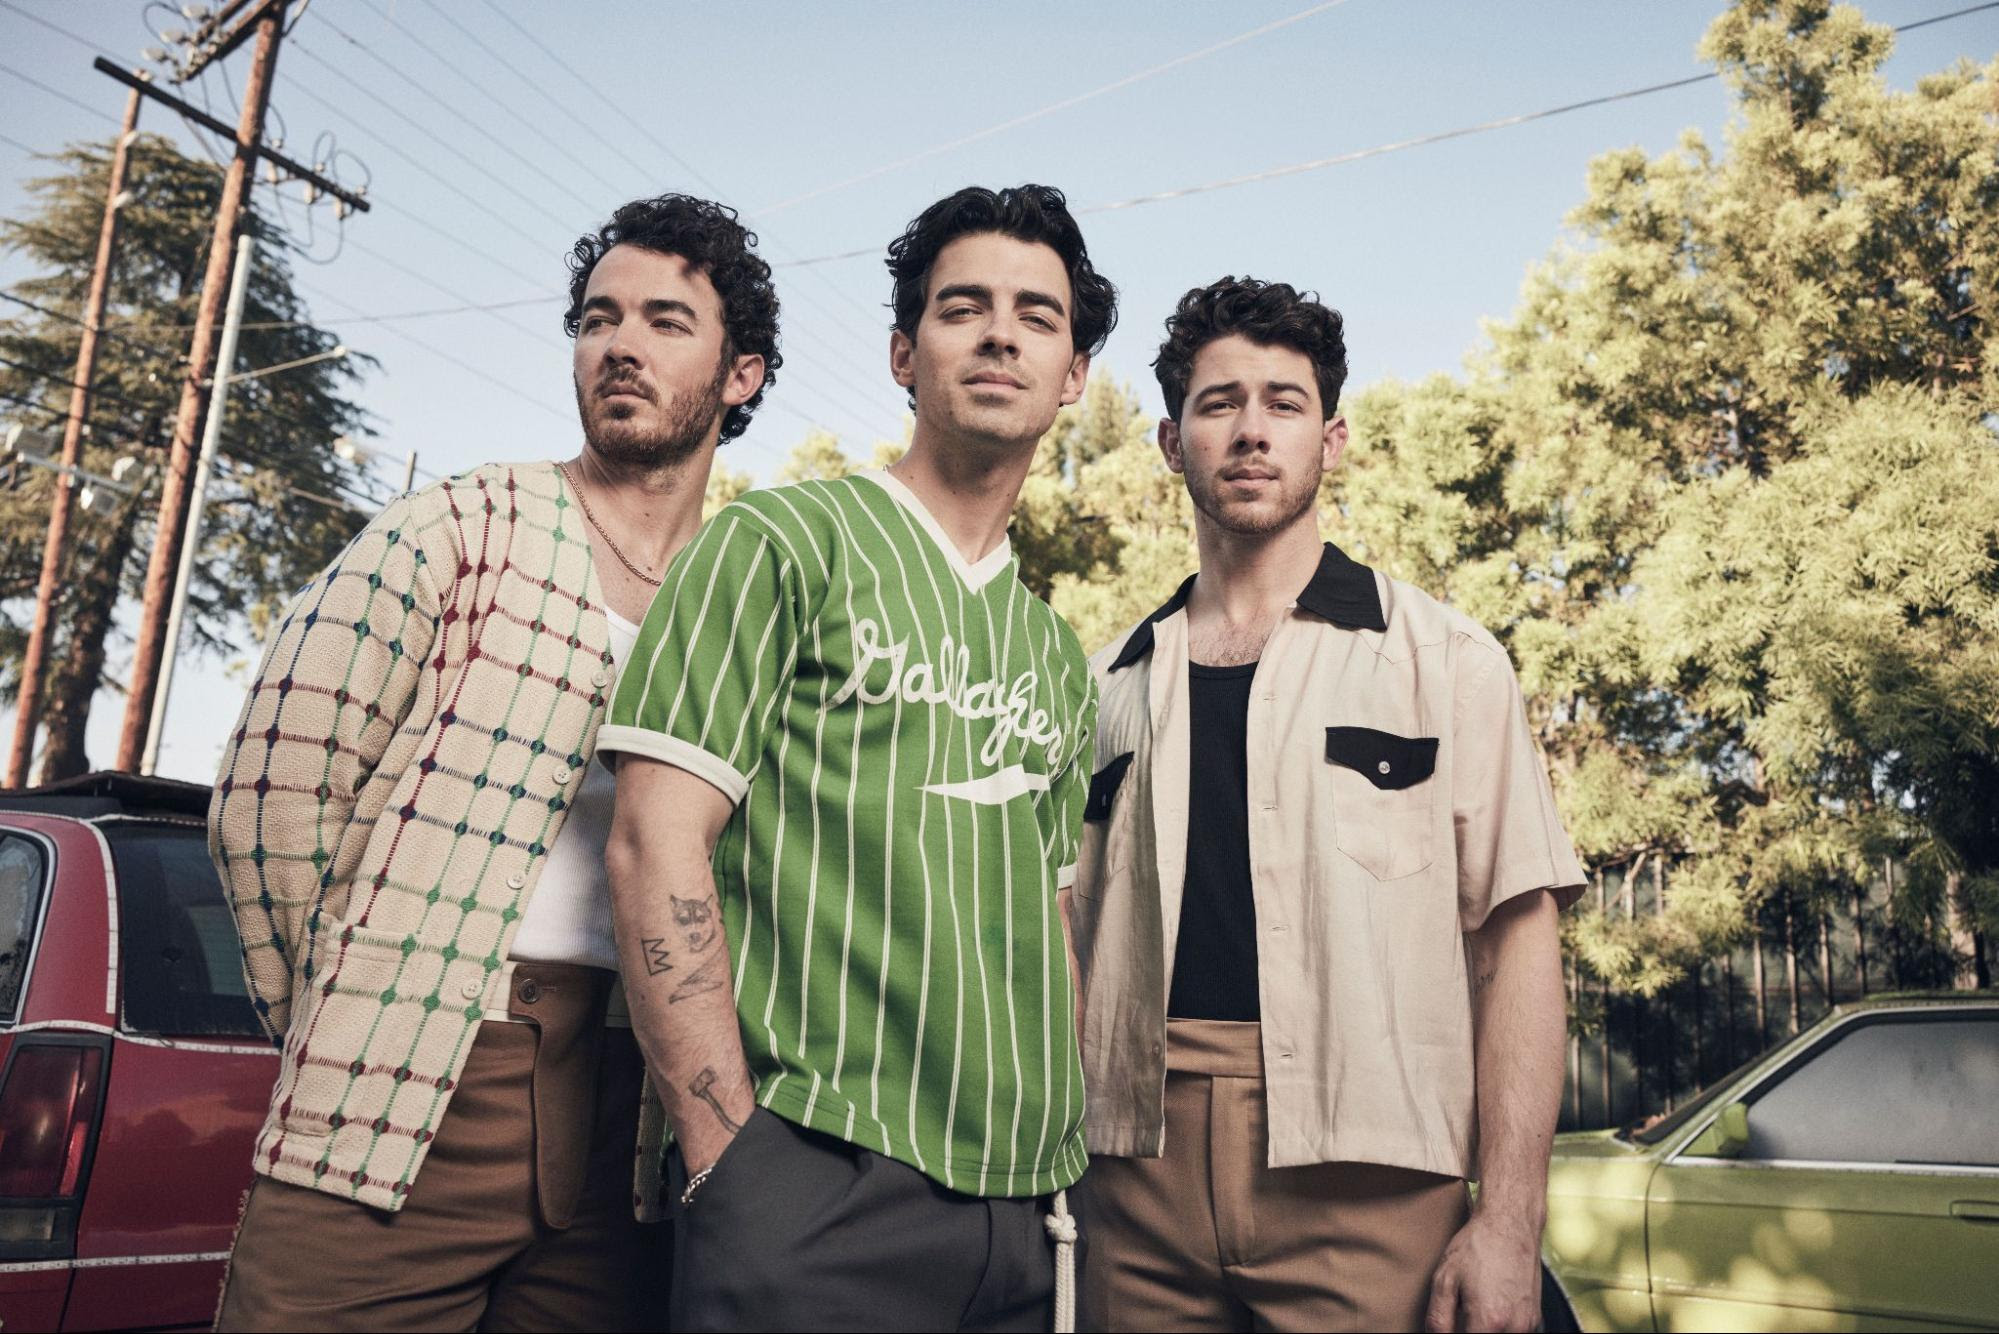 Jonas Brothers stood by some cars with trees in the background